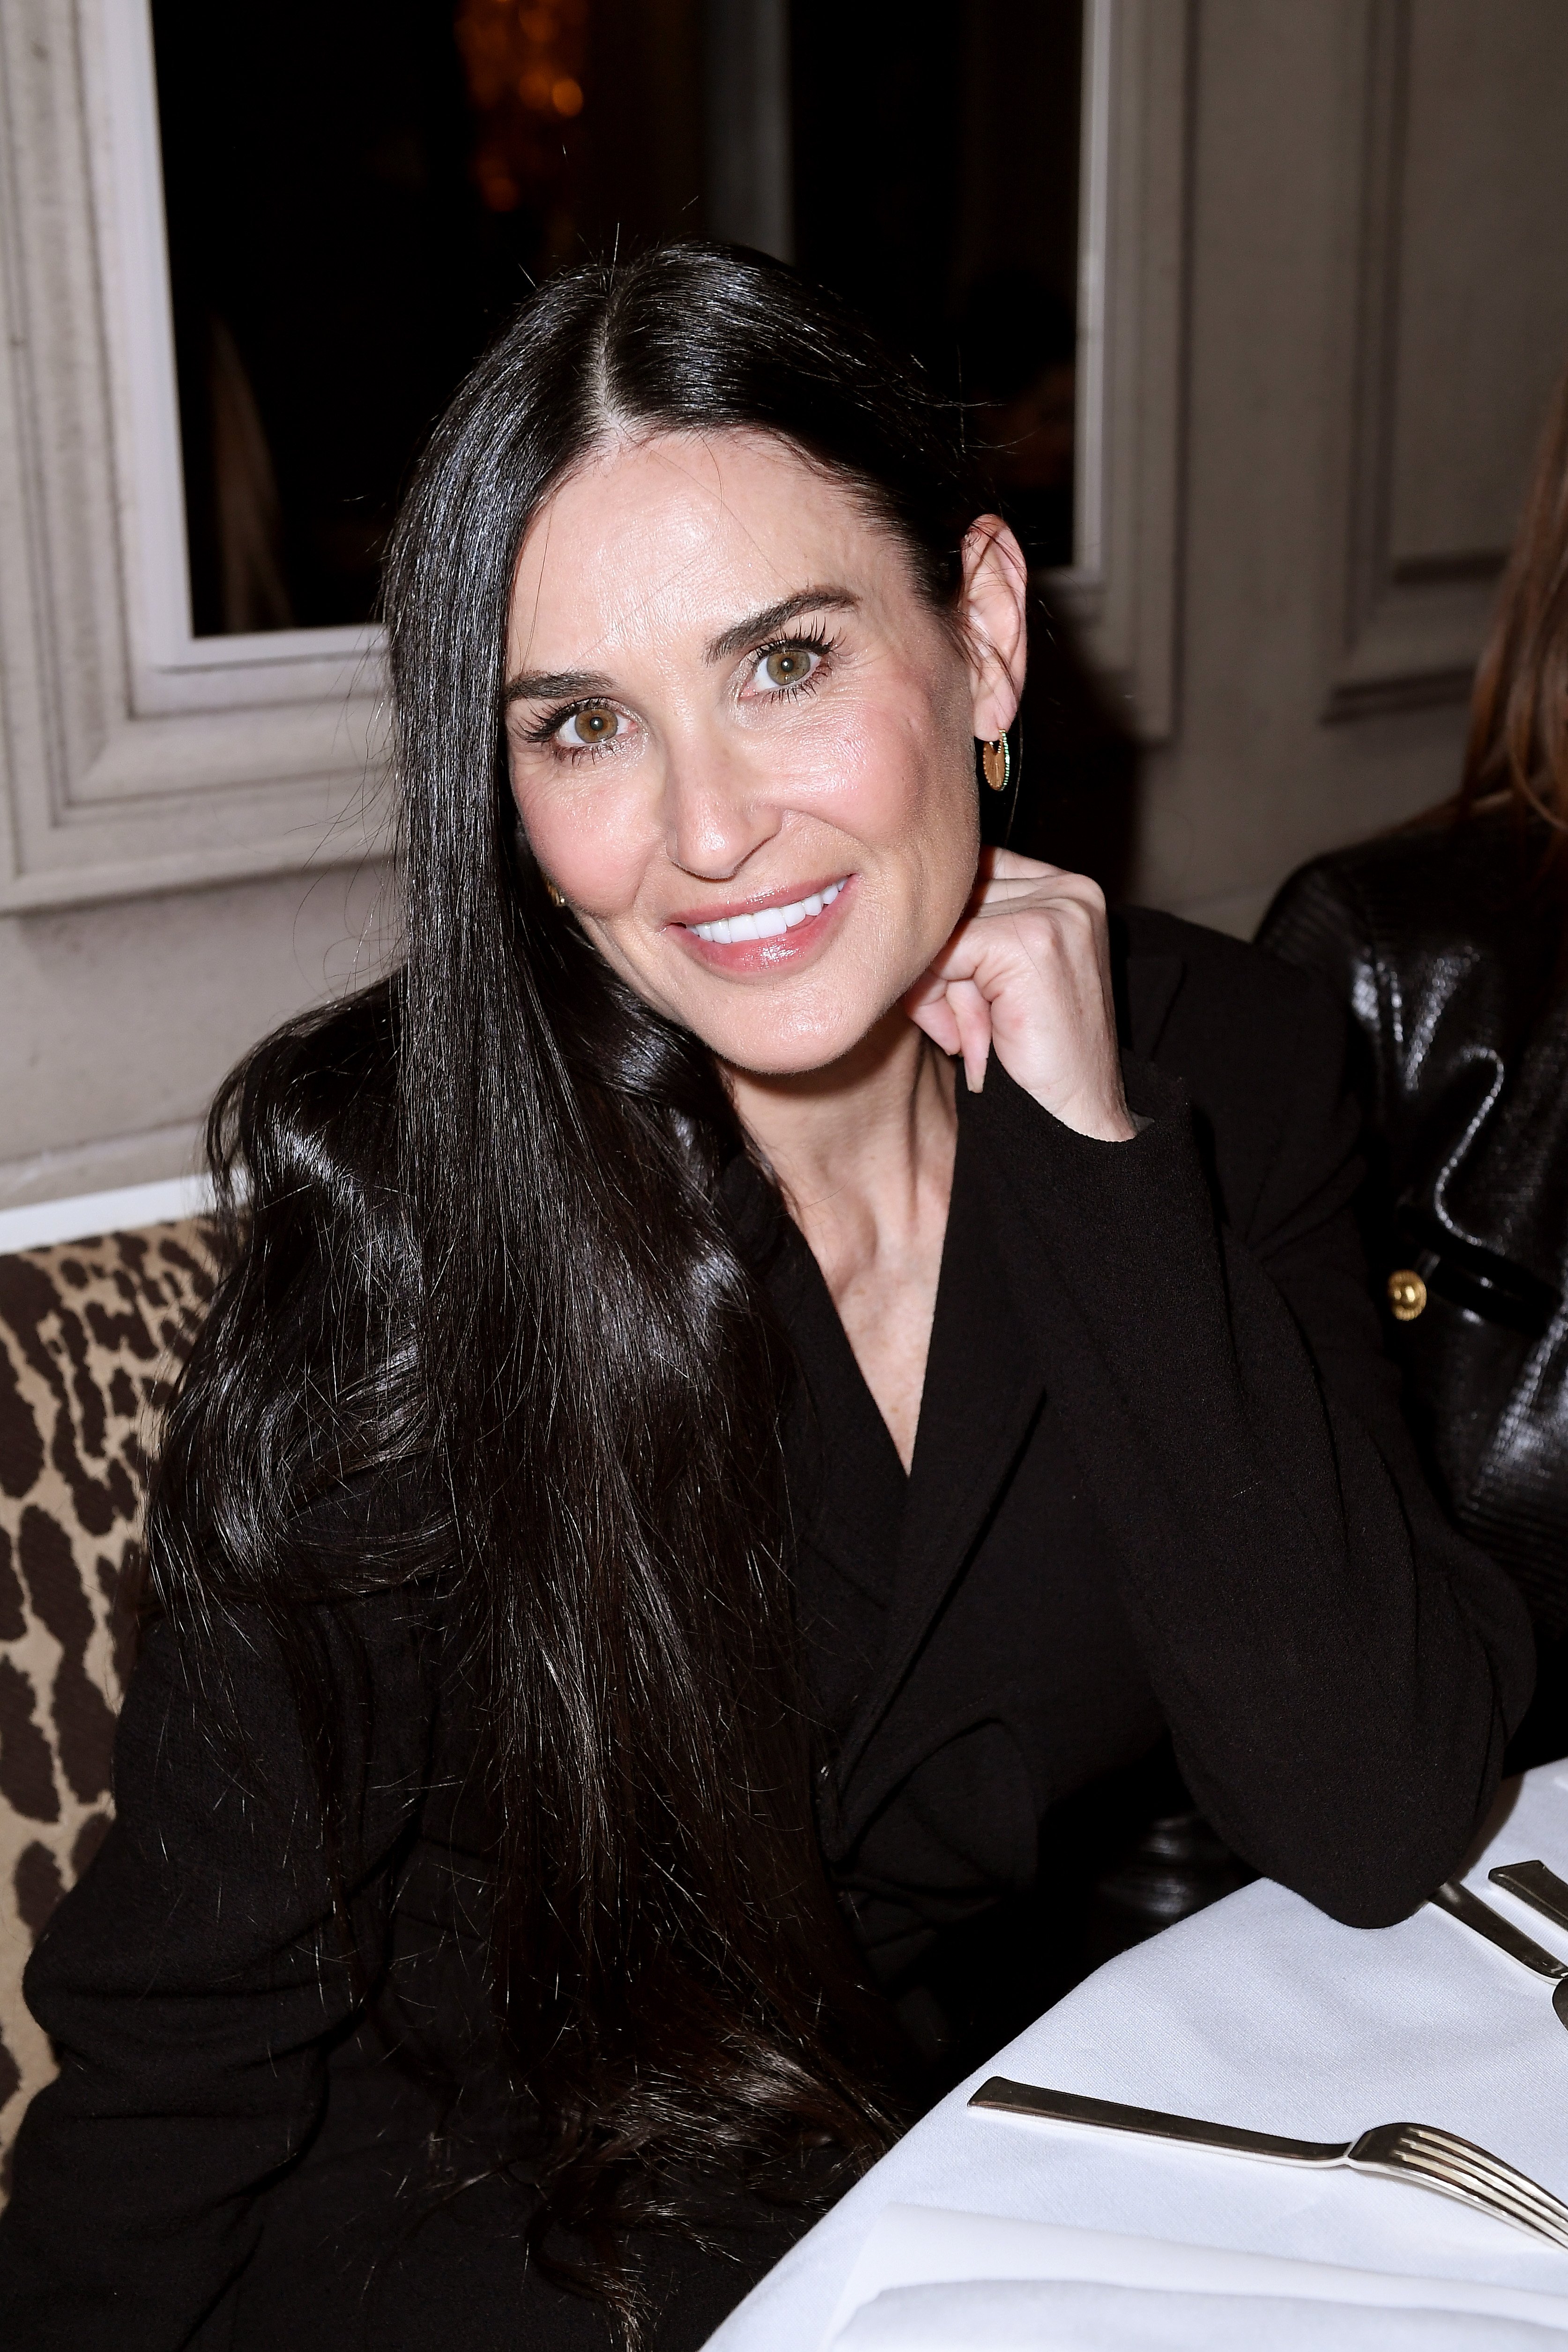  Demi Moore attends the Monot show as part of the Paris Fashion Week Womenswear Fall/Winter 2020/2021 on February 29, 2020 in Paris, France. | Source: Getty Images